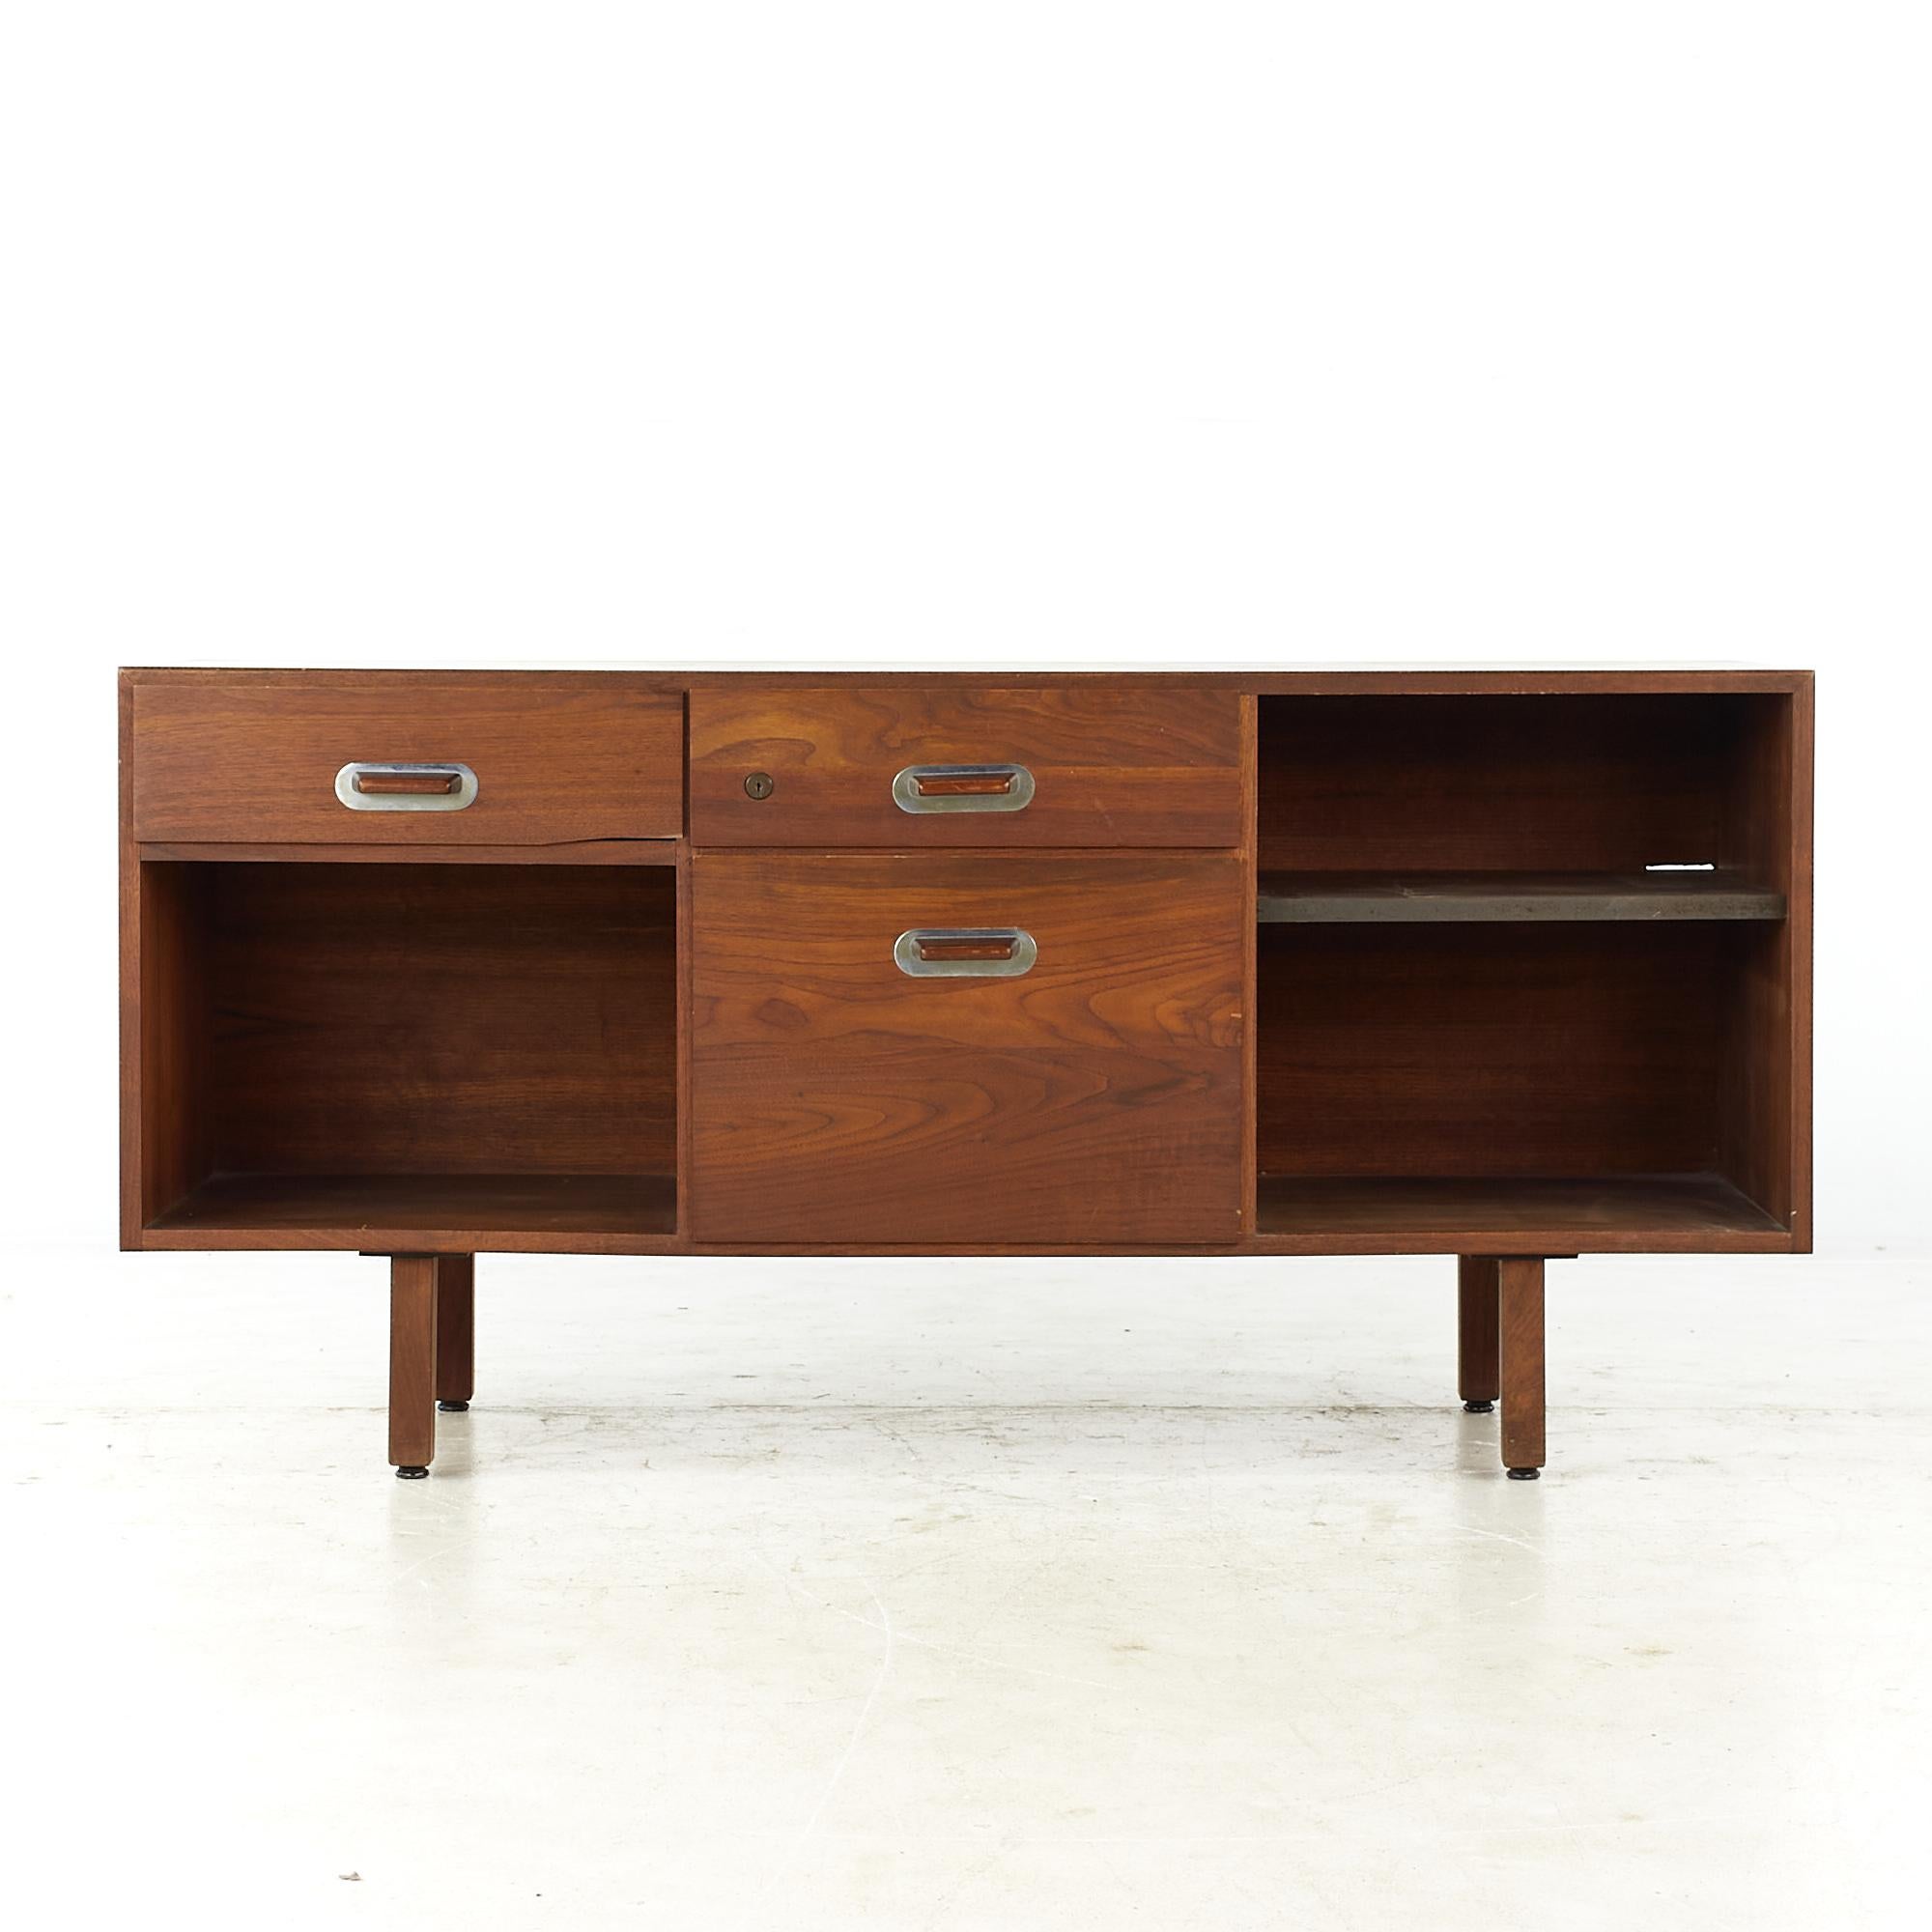 Jens Risom mid-century walnut credenza.

This credenza measures: 54.25 wide x 20.25 deep x 26.25 inches high.

All pieces of furniture can be had in what we call restored vintage condition. That means the piece is restored upon purchase so it’s